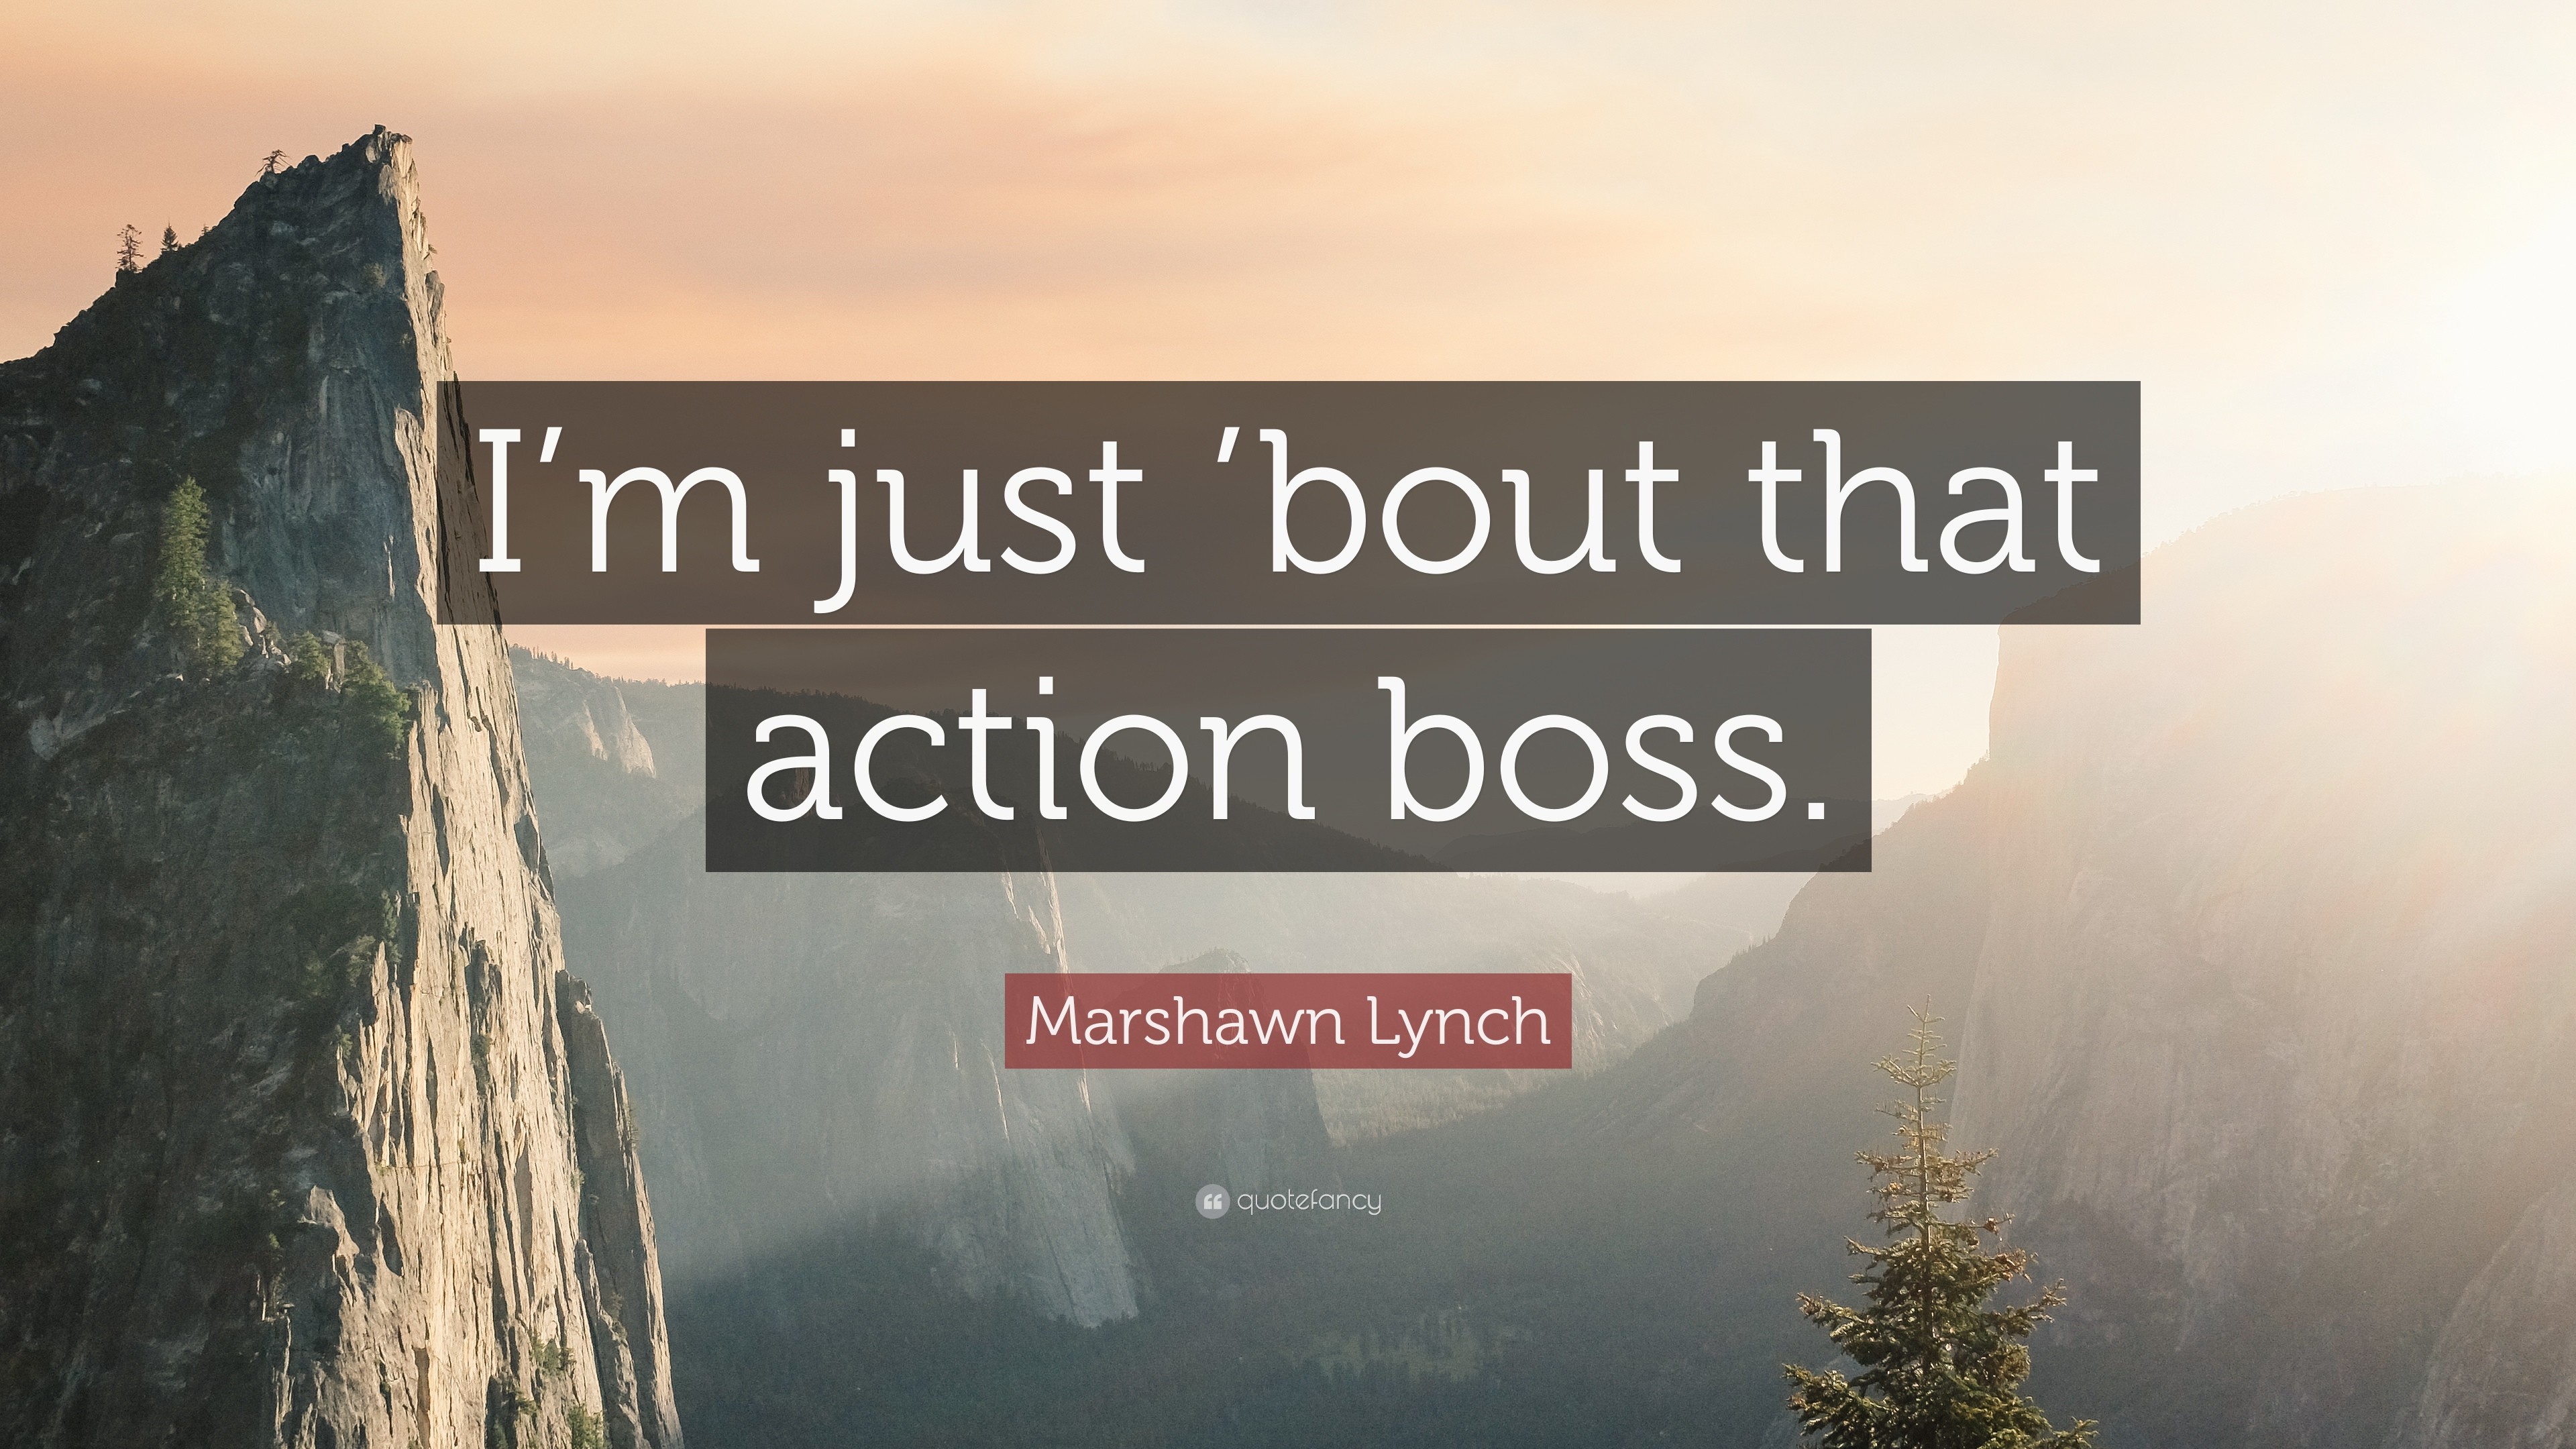 Marshawn Lynch Quote Im just bout that action boss.